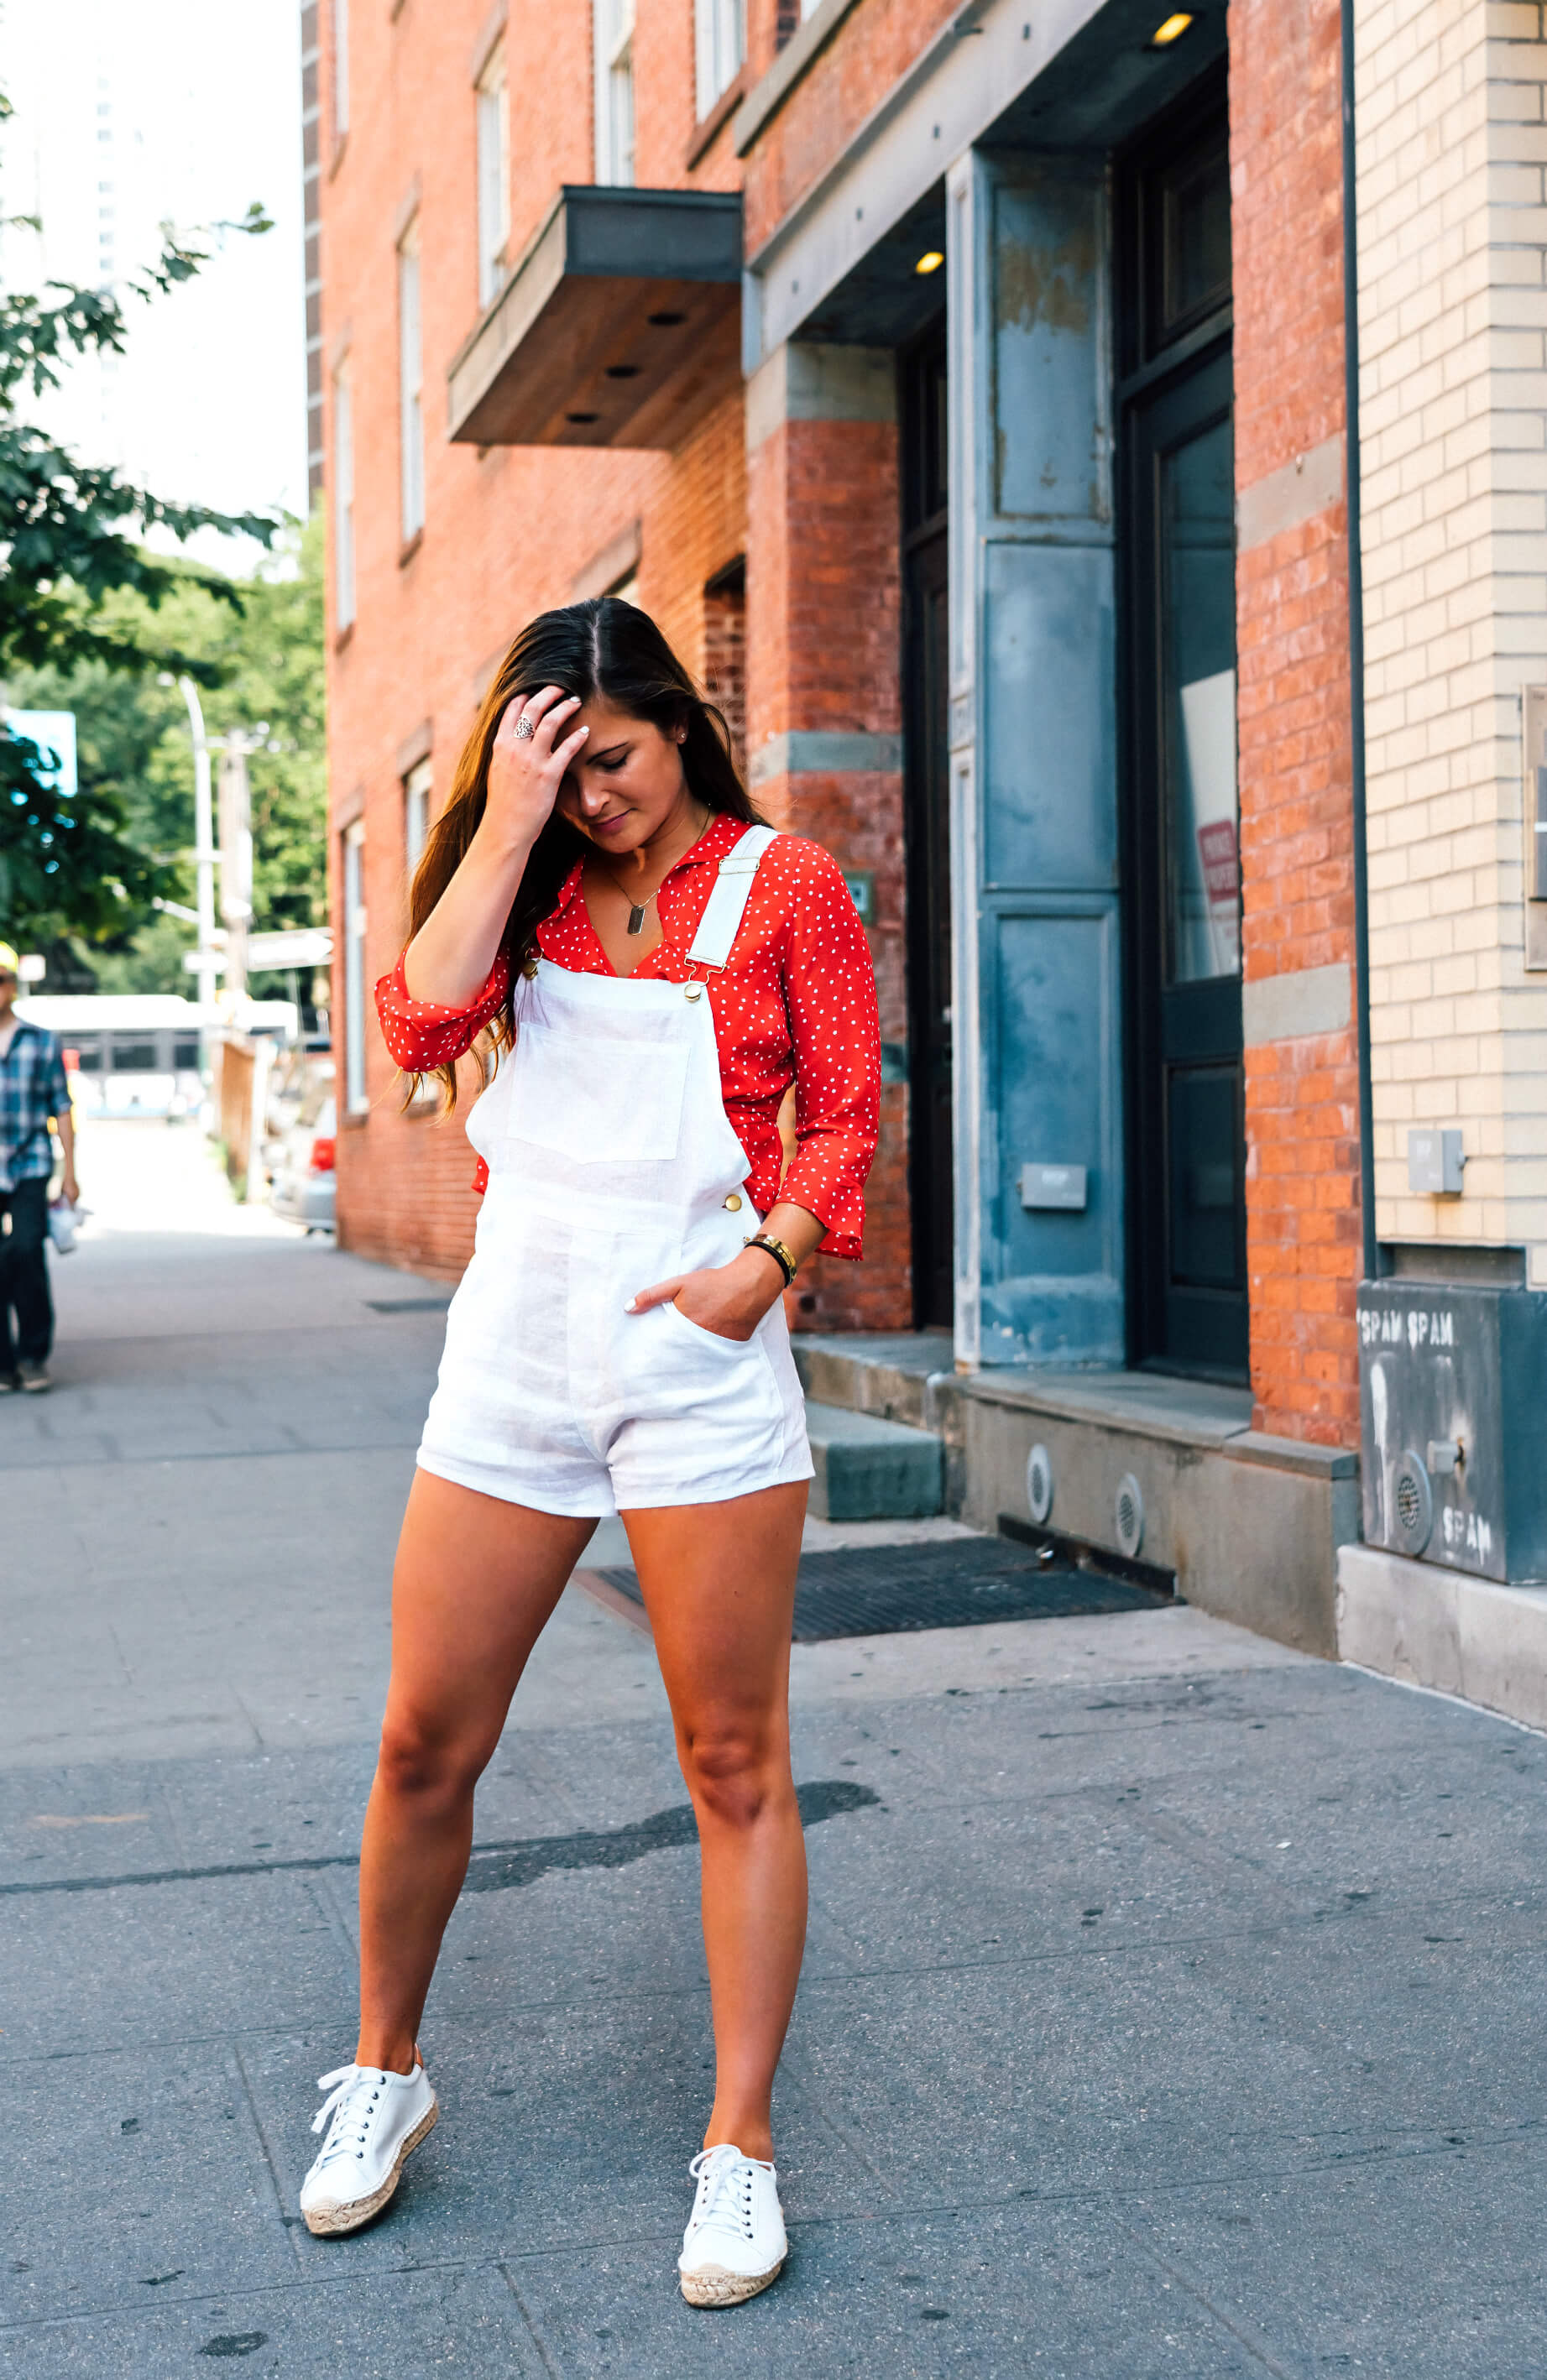 SSO by Danielle White Linen Overall Short, Bardot Red Polka Dot Top, Espadrille Sneakers, oNecklace Dog Tag Handwriting Necklace, Summer Style, Tilden of To Be Bright